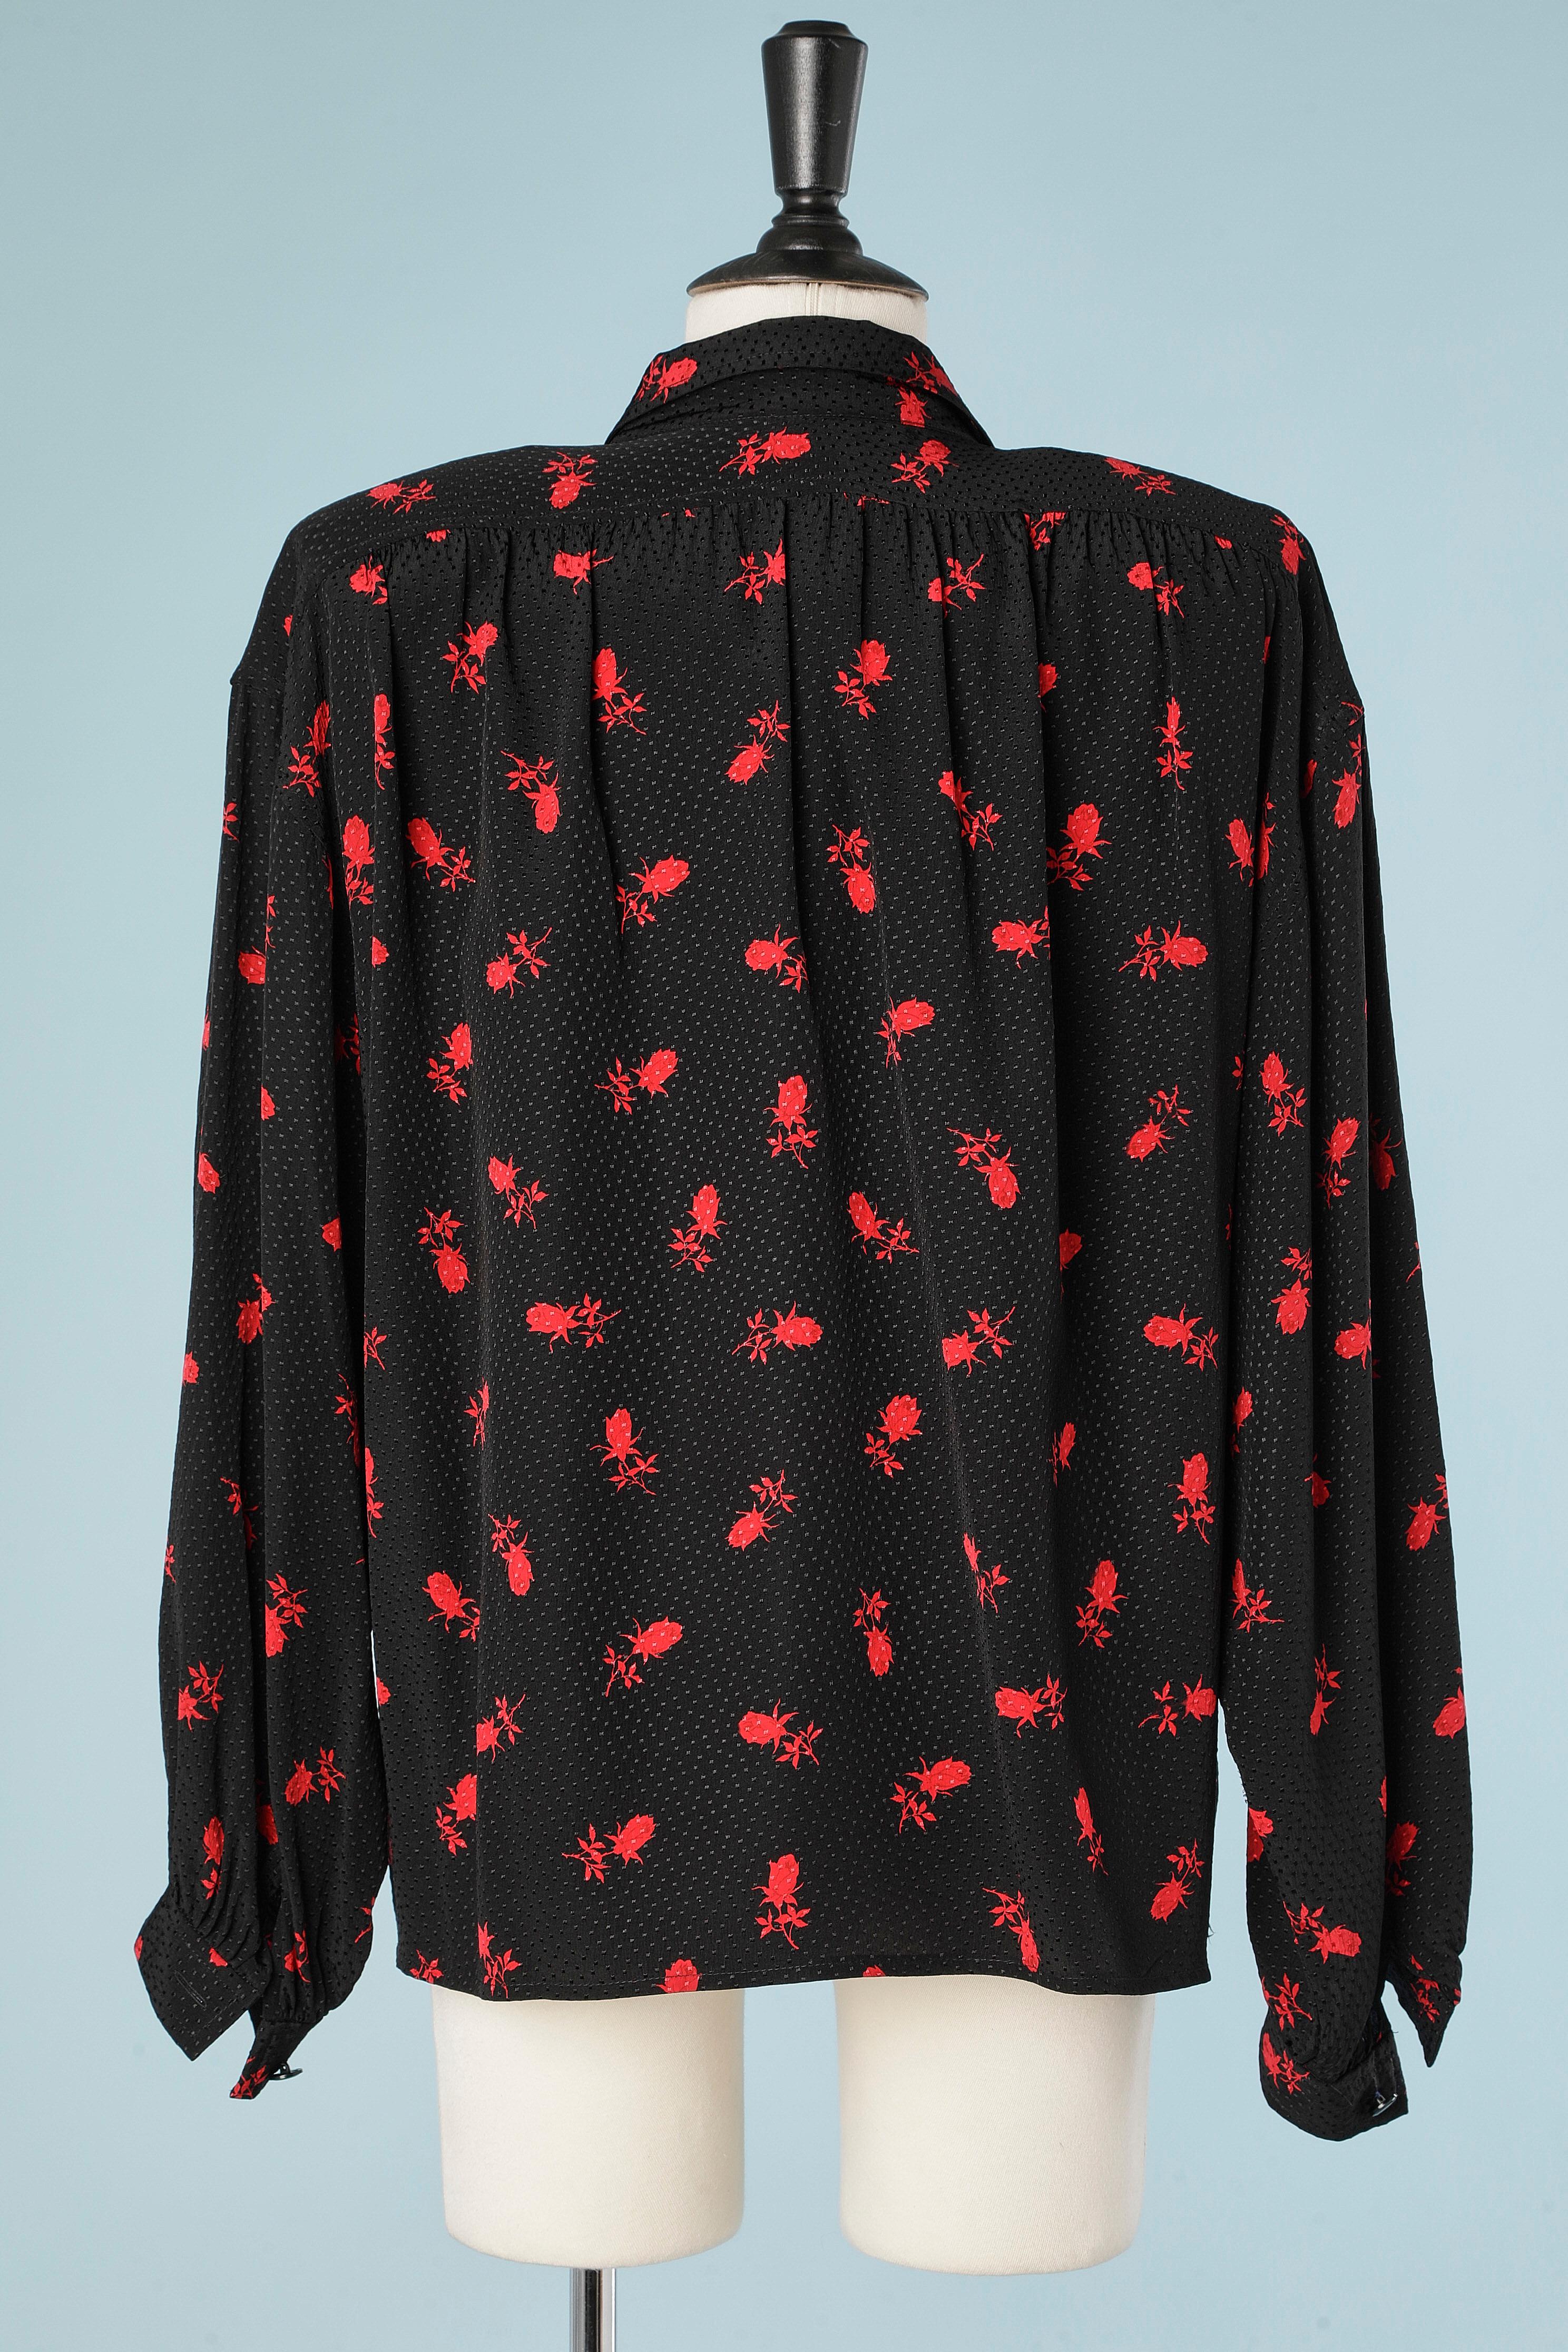 Black silk jacquard shirt with red roses print UNGARO TER  For Sale 1